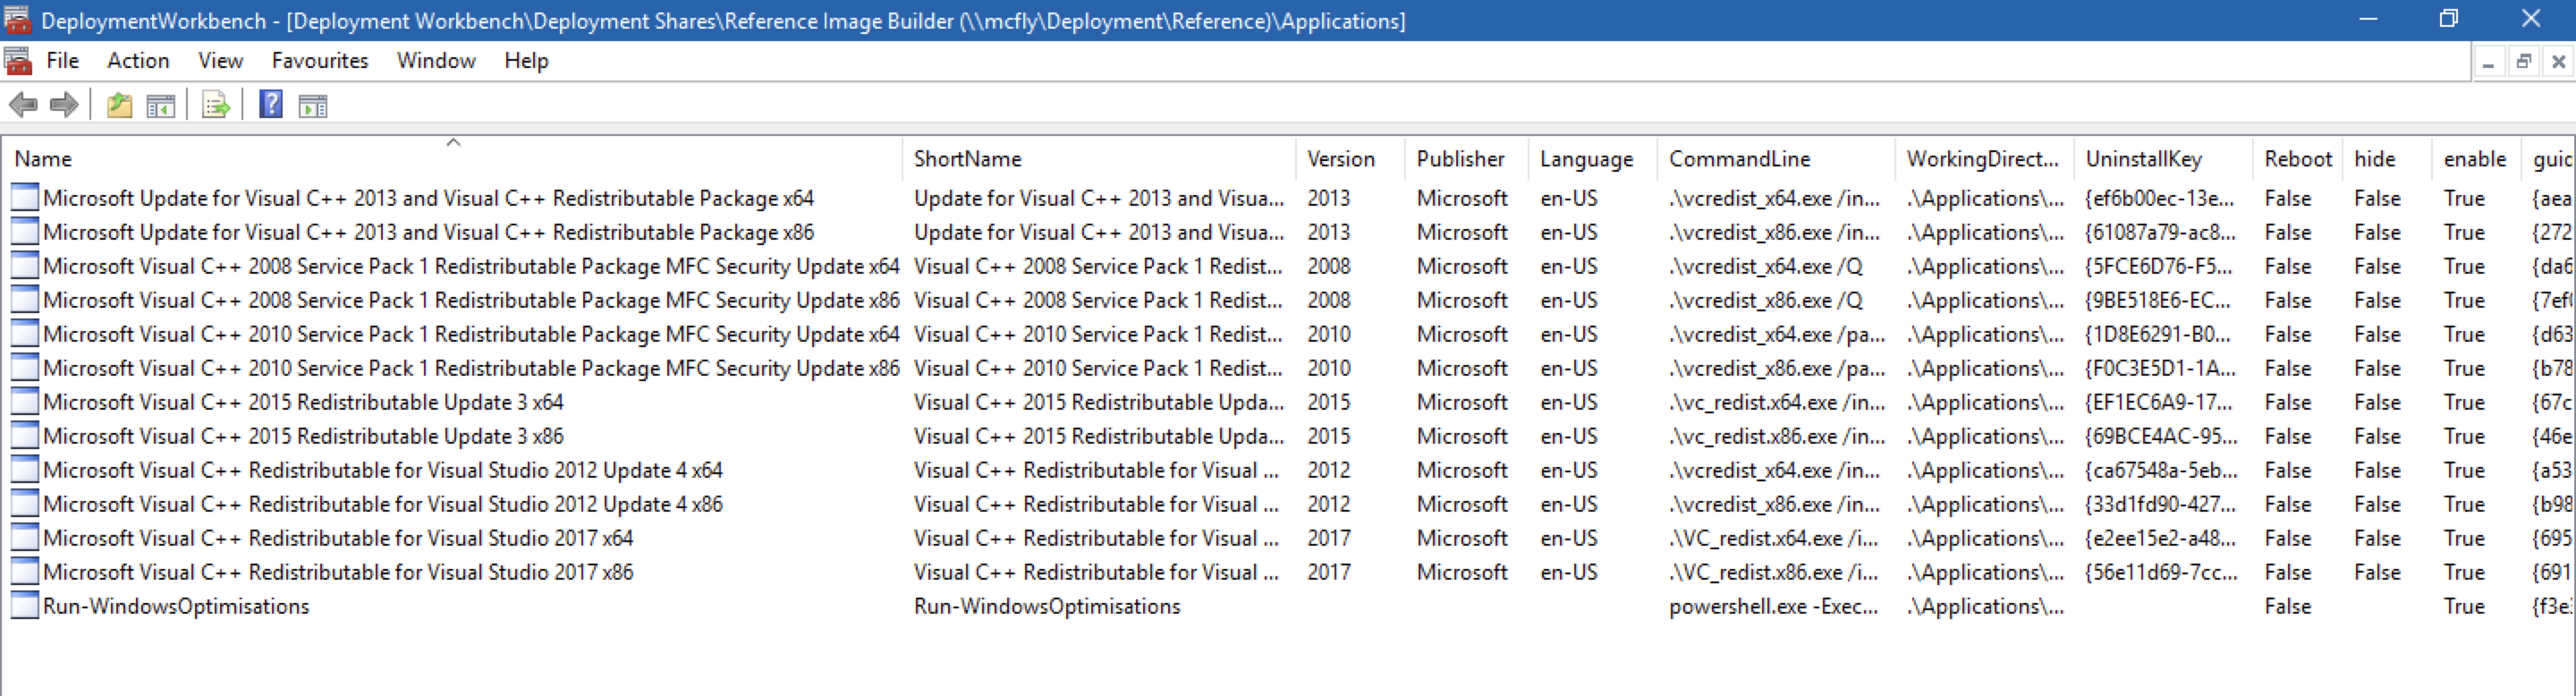 Visual C++ Redistributables imported into an MDT share with VcRedist